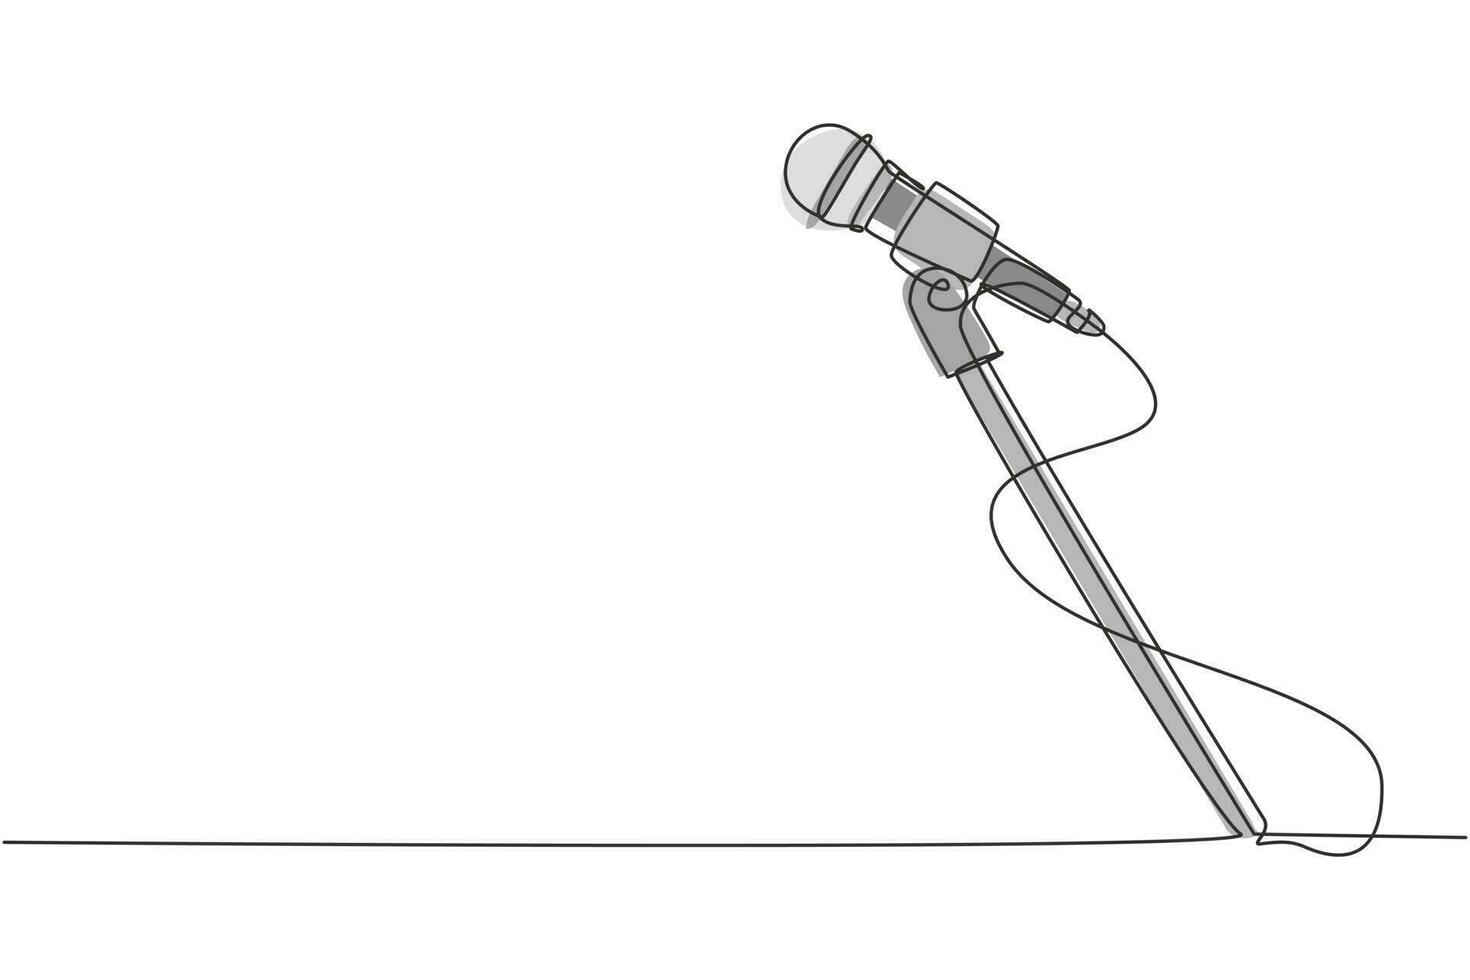 Single one line drawing stand with microphone on white background. Singer sing song with standing mic at music concert summer festival. Modern continuous line draw design graphic vector illustration